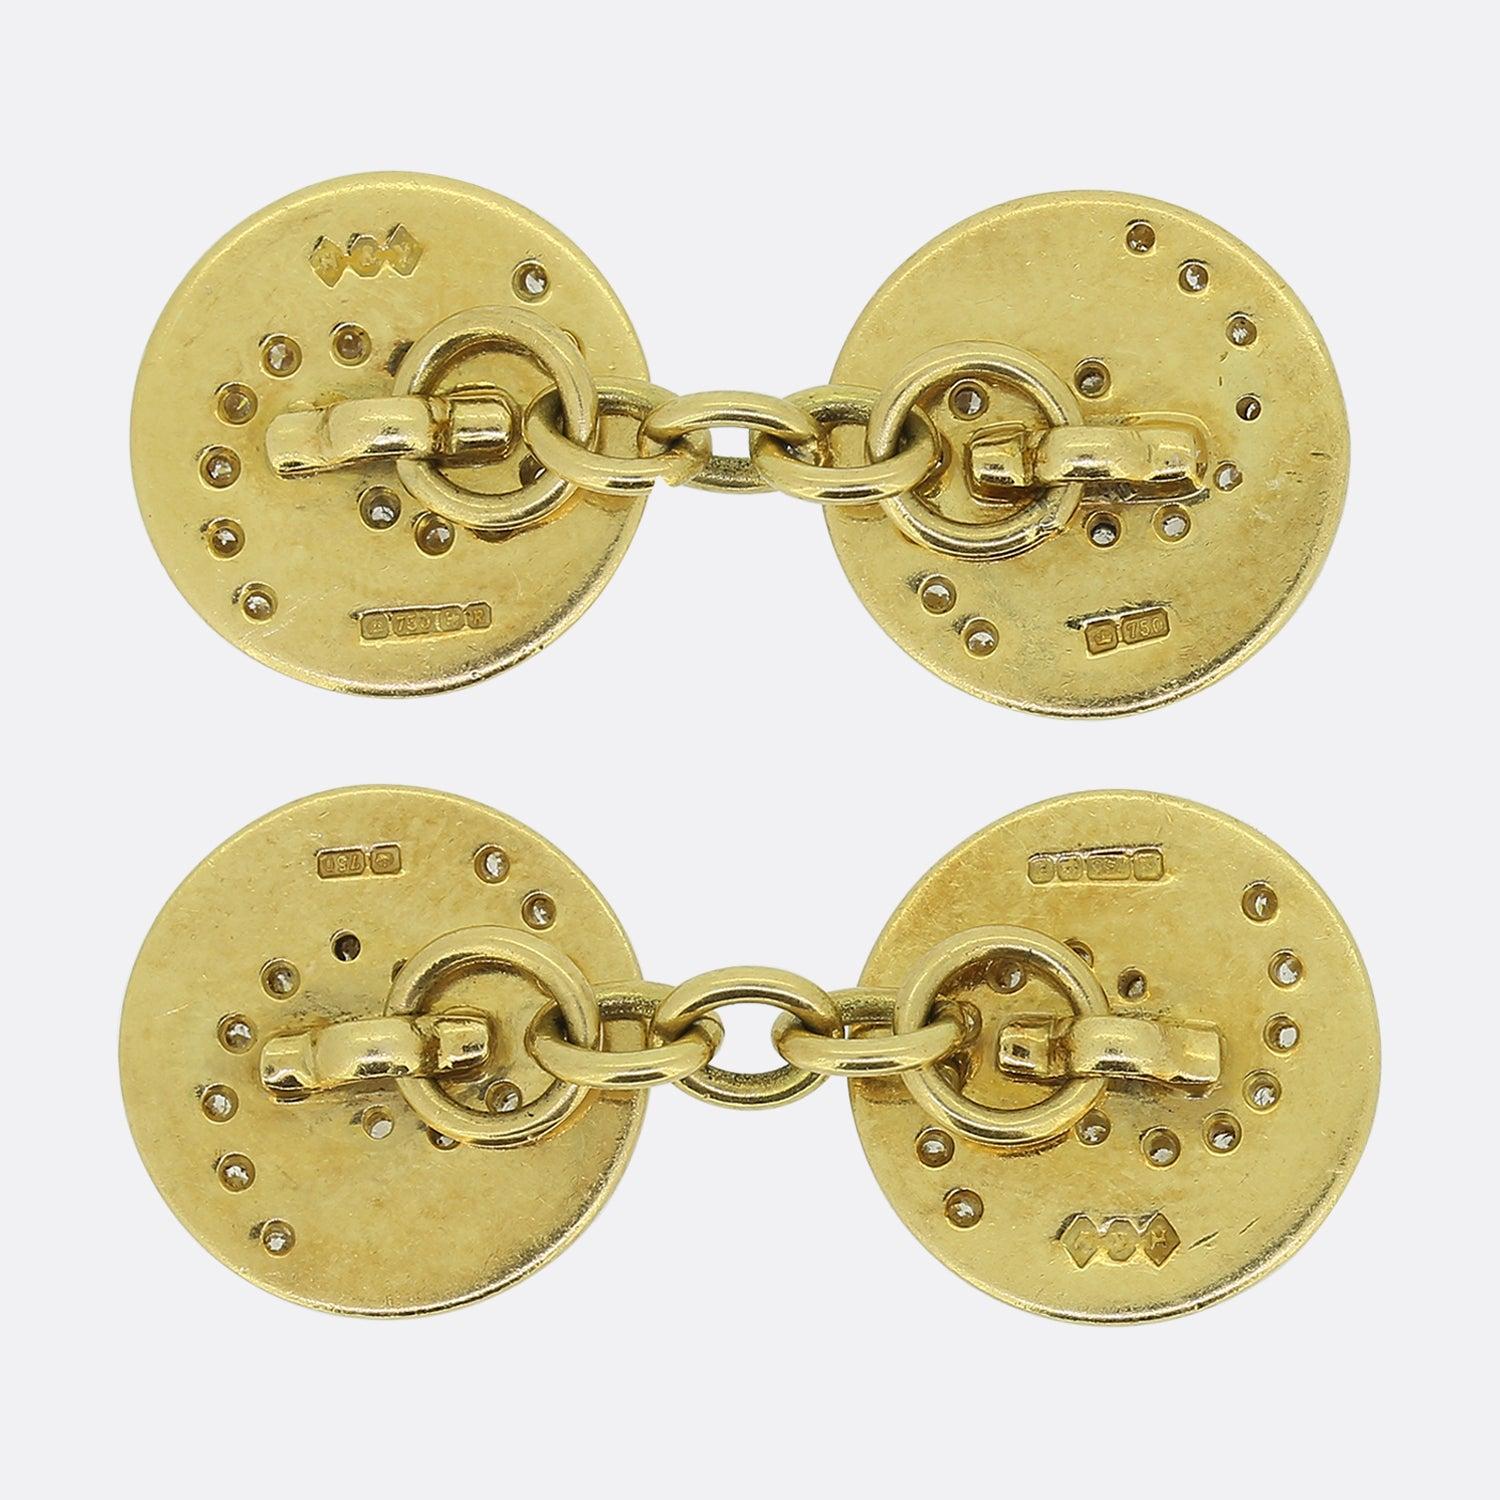 Here we have a stylish pair of enamel and diamond chain link cufflinks. Each piece has been crafted from 18ct yellow gold into a circular shape with two swirling channels of round brilliant cut diamonds. Expertly finished red guilloché enamel